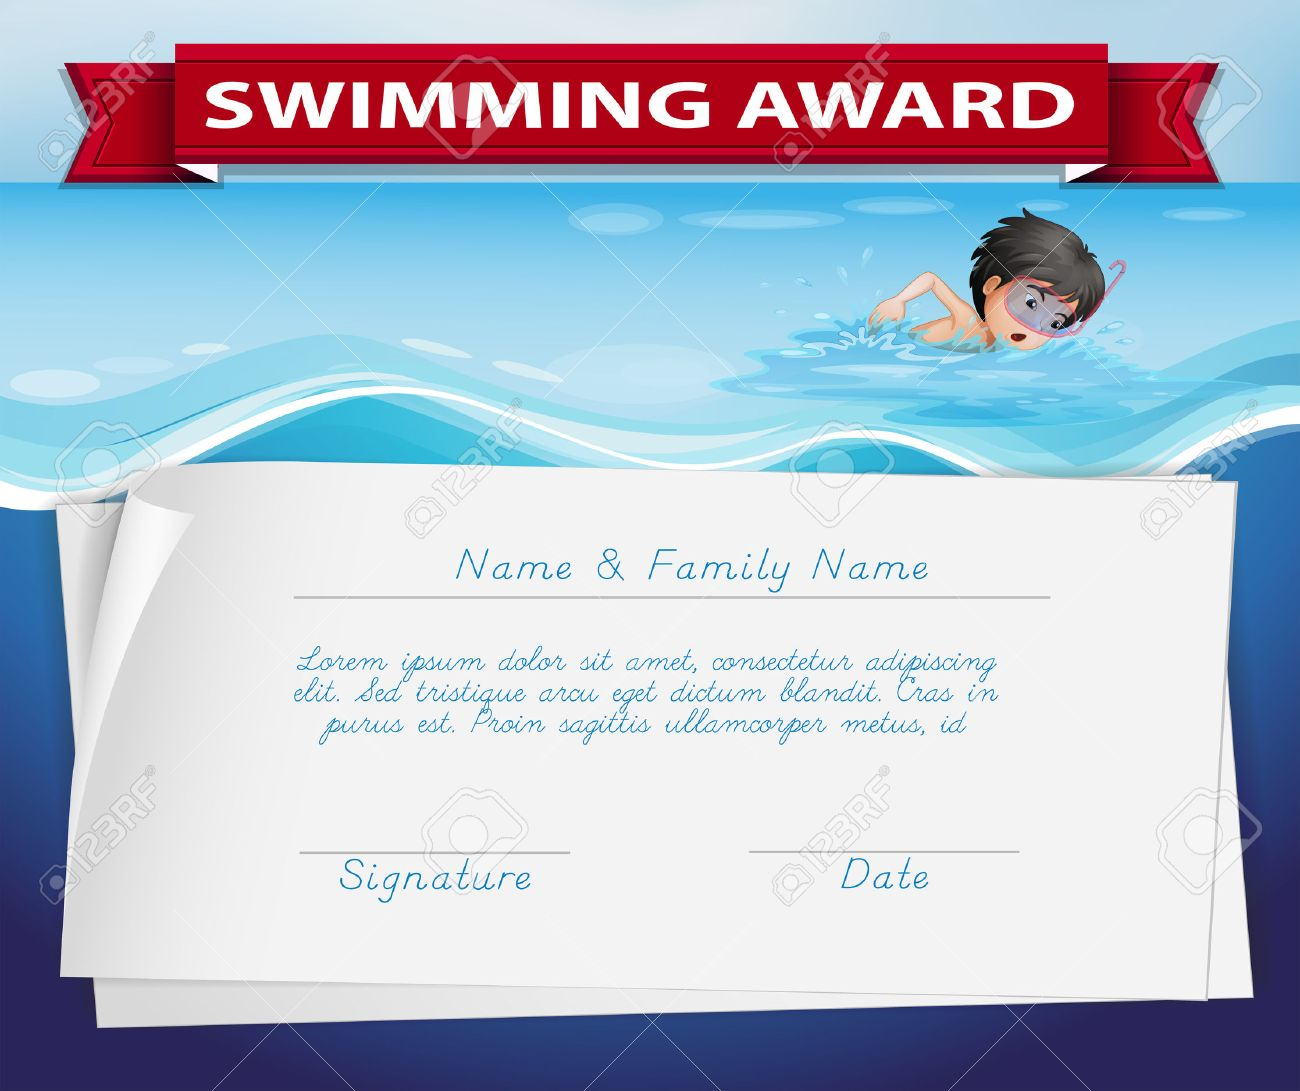 Template Of Certificate For Swimming Award Illustration Royalty  Pertaining To Swimming Award Certificate Template